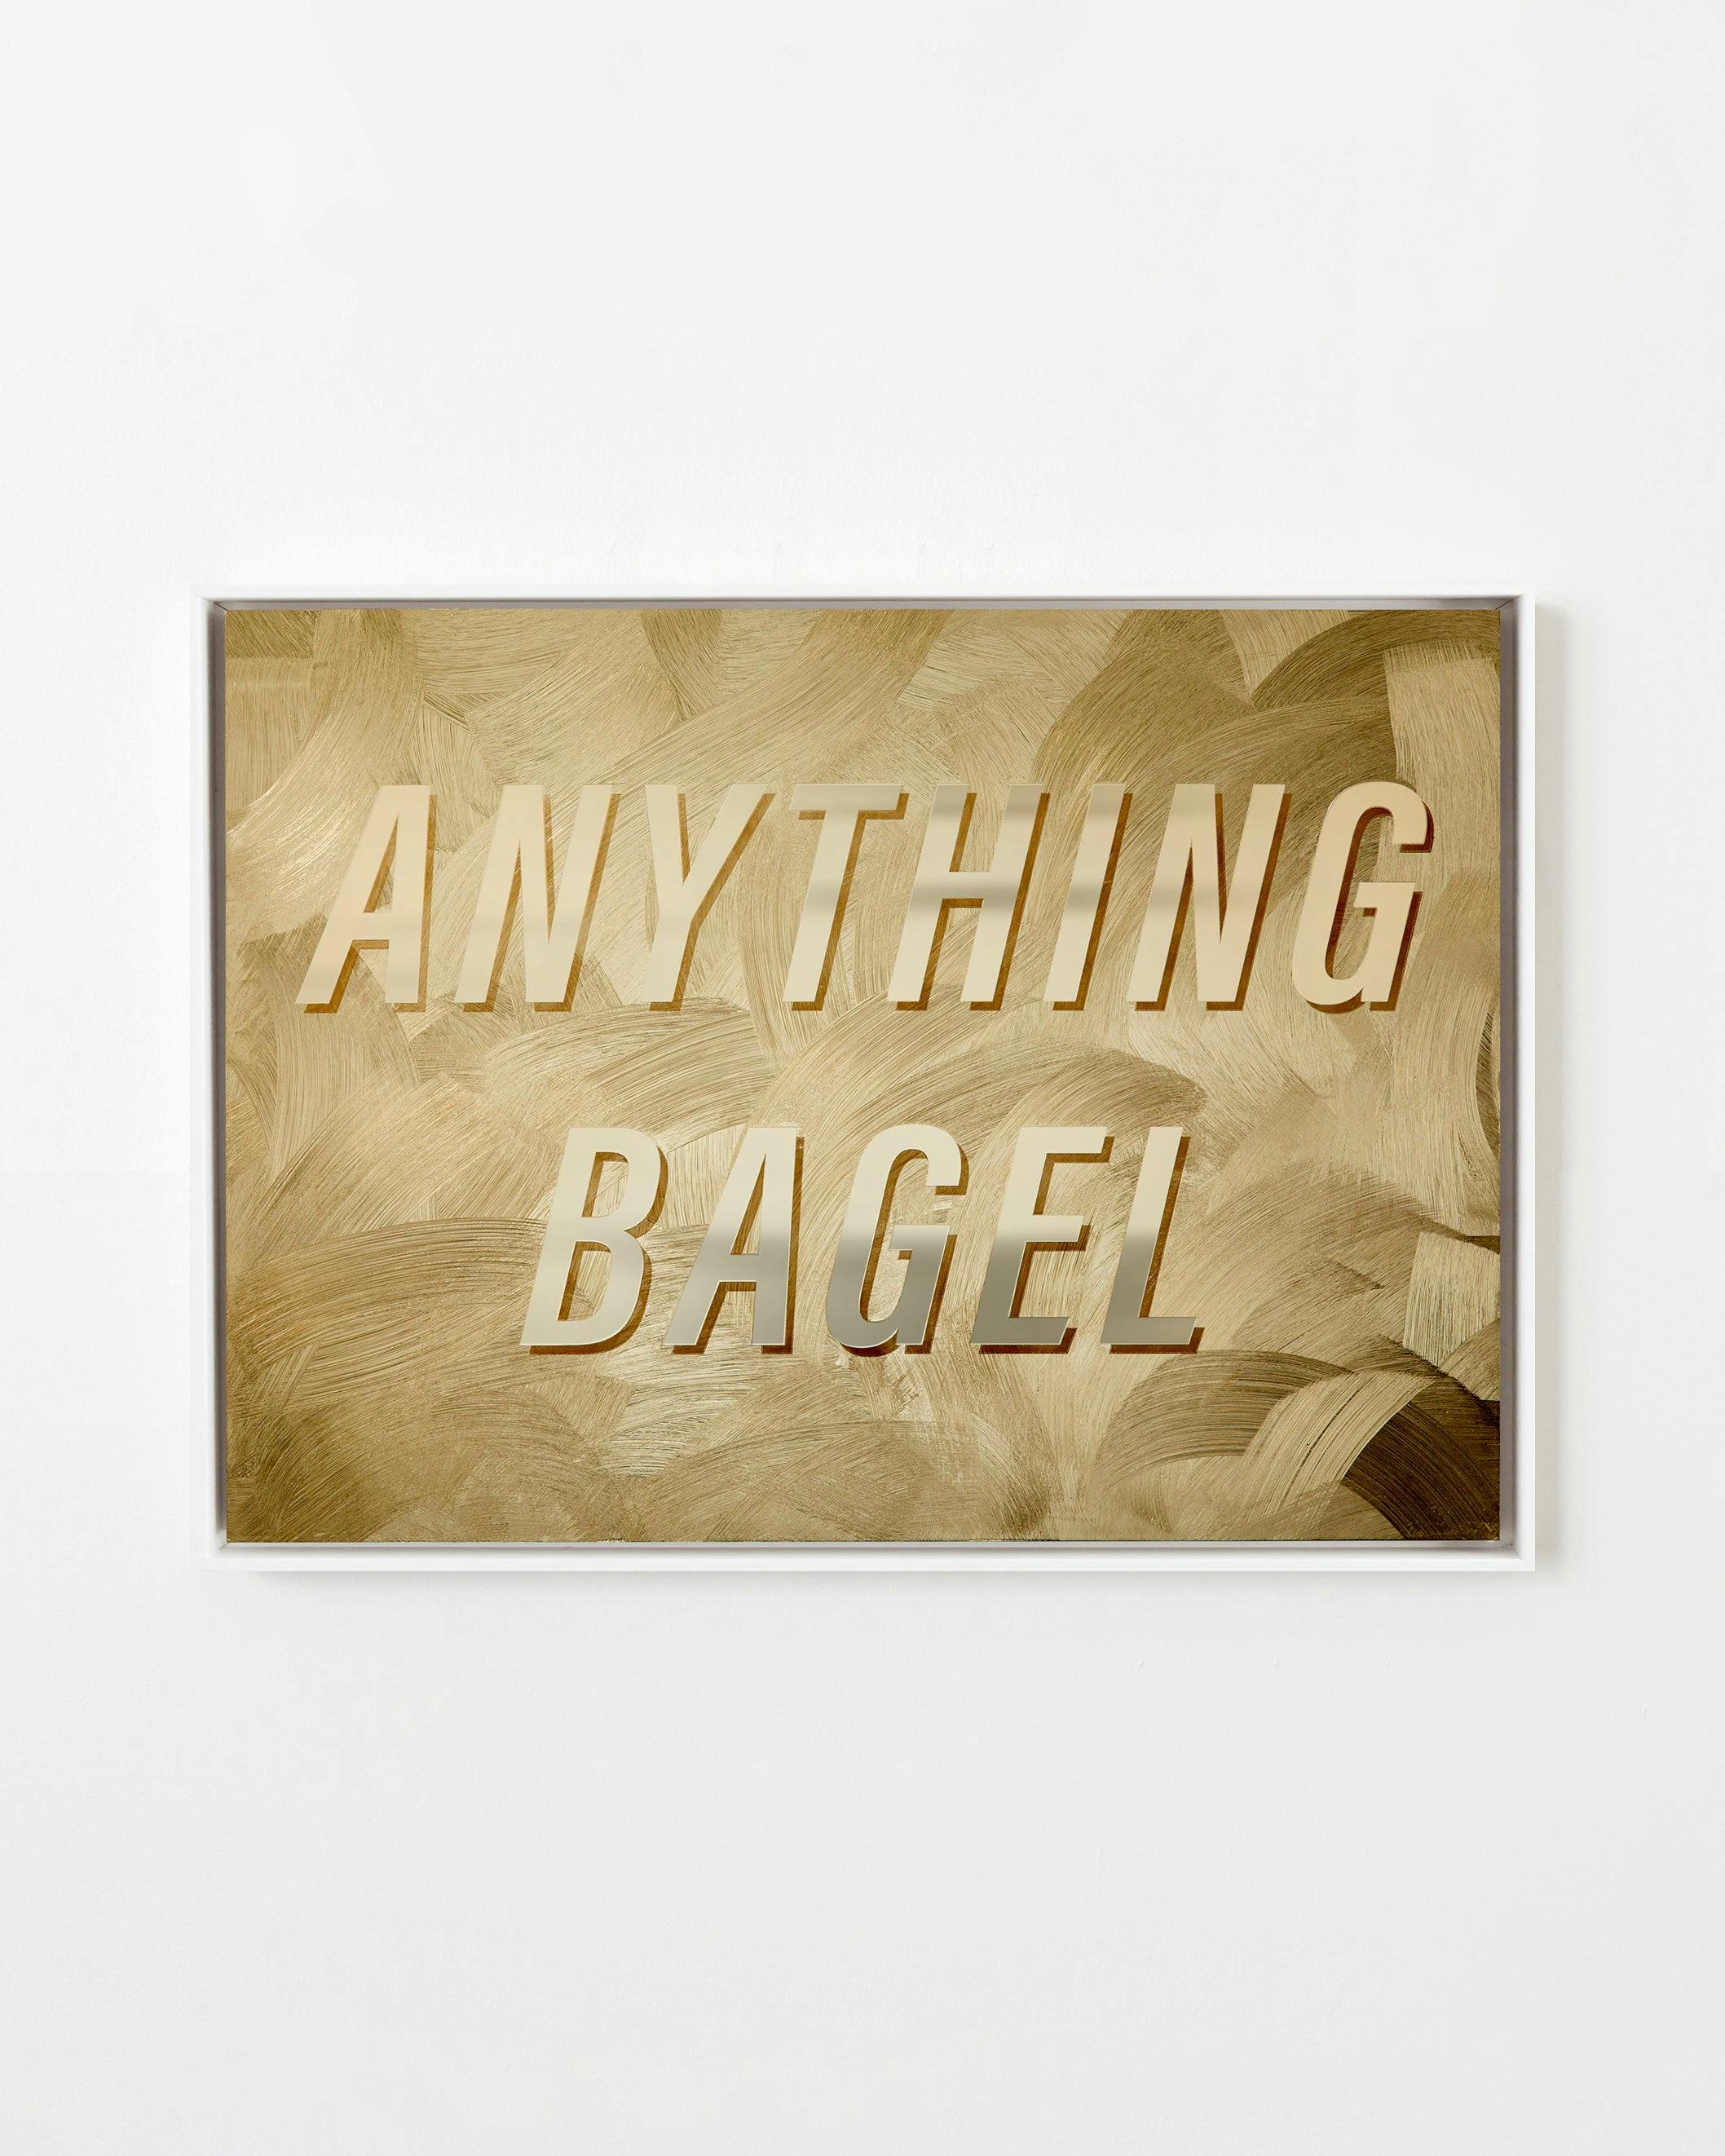 Mixed Media by Ben Skinner titled "Anything Bagel".